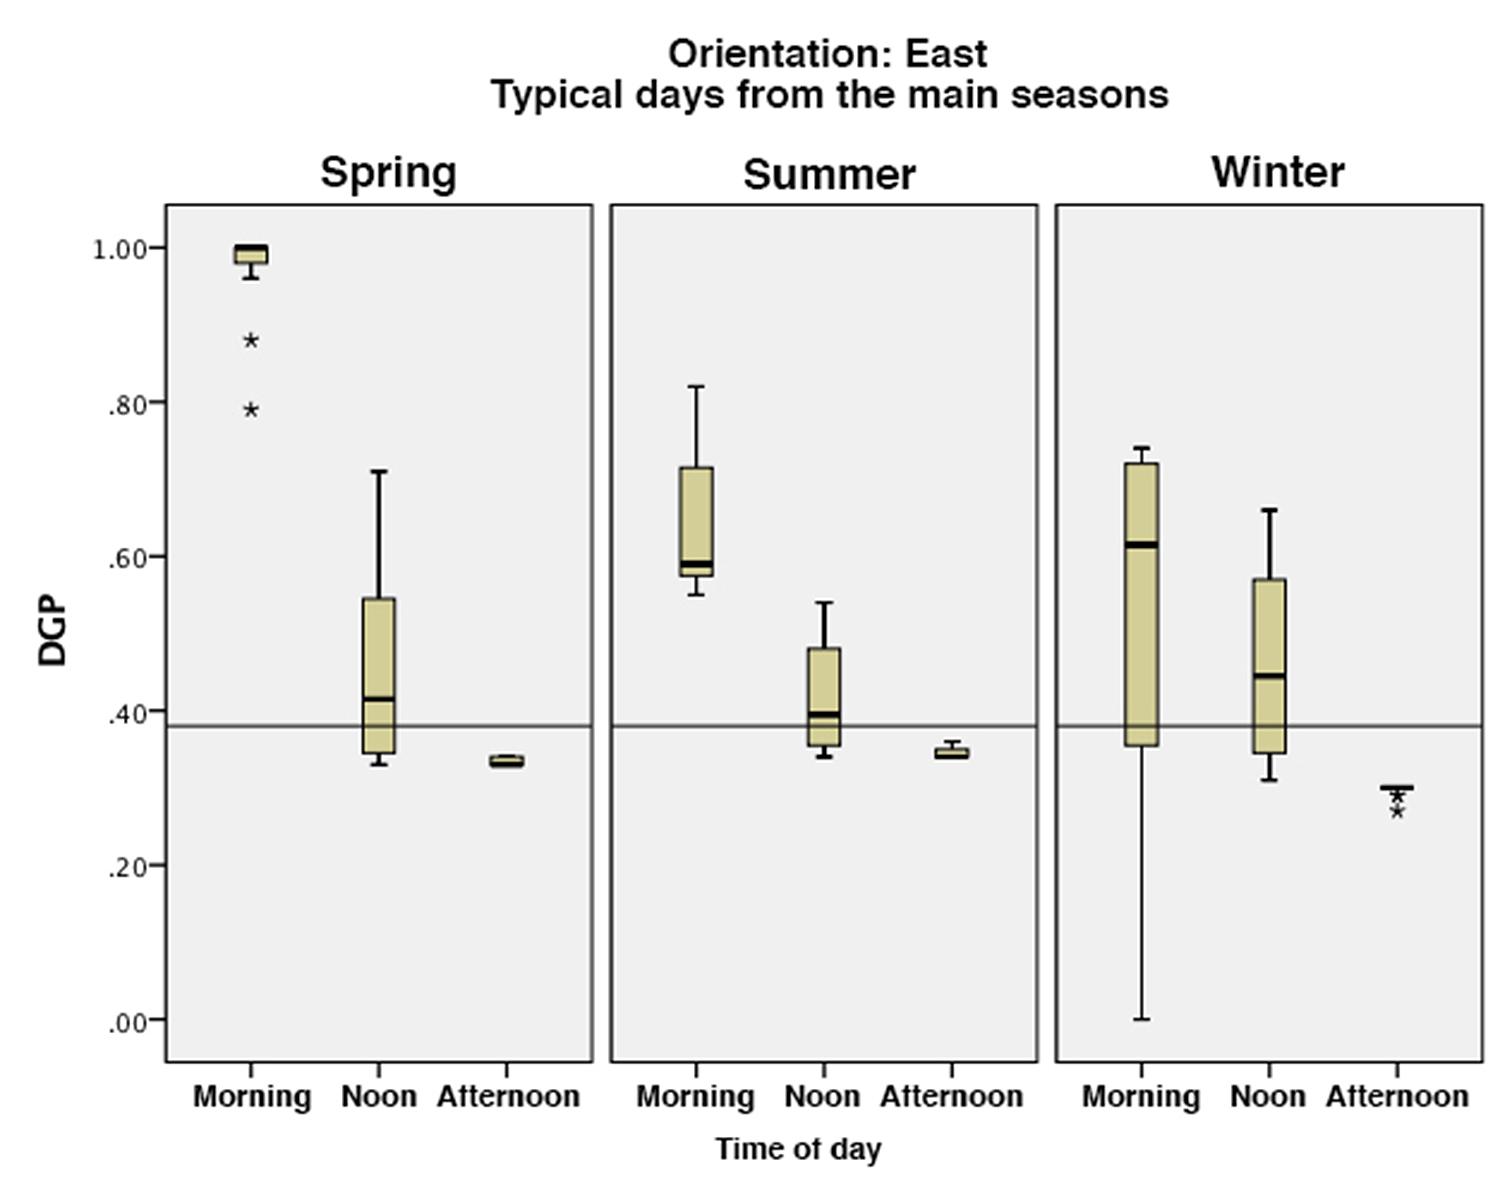 Box plot of DGP values for o_east on typical seasonal days in different times of day.